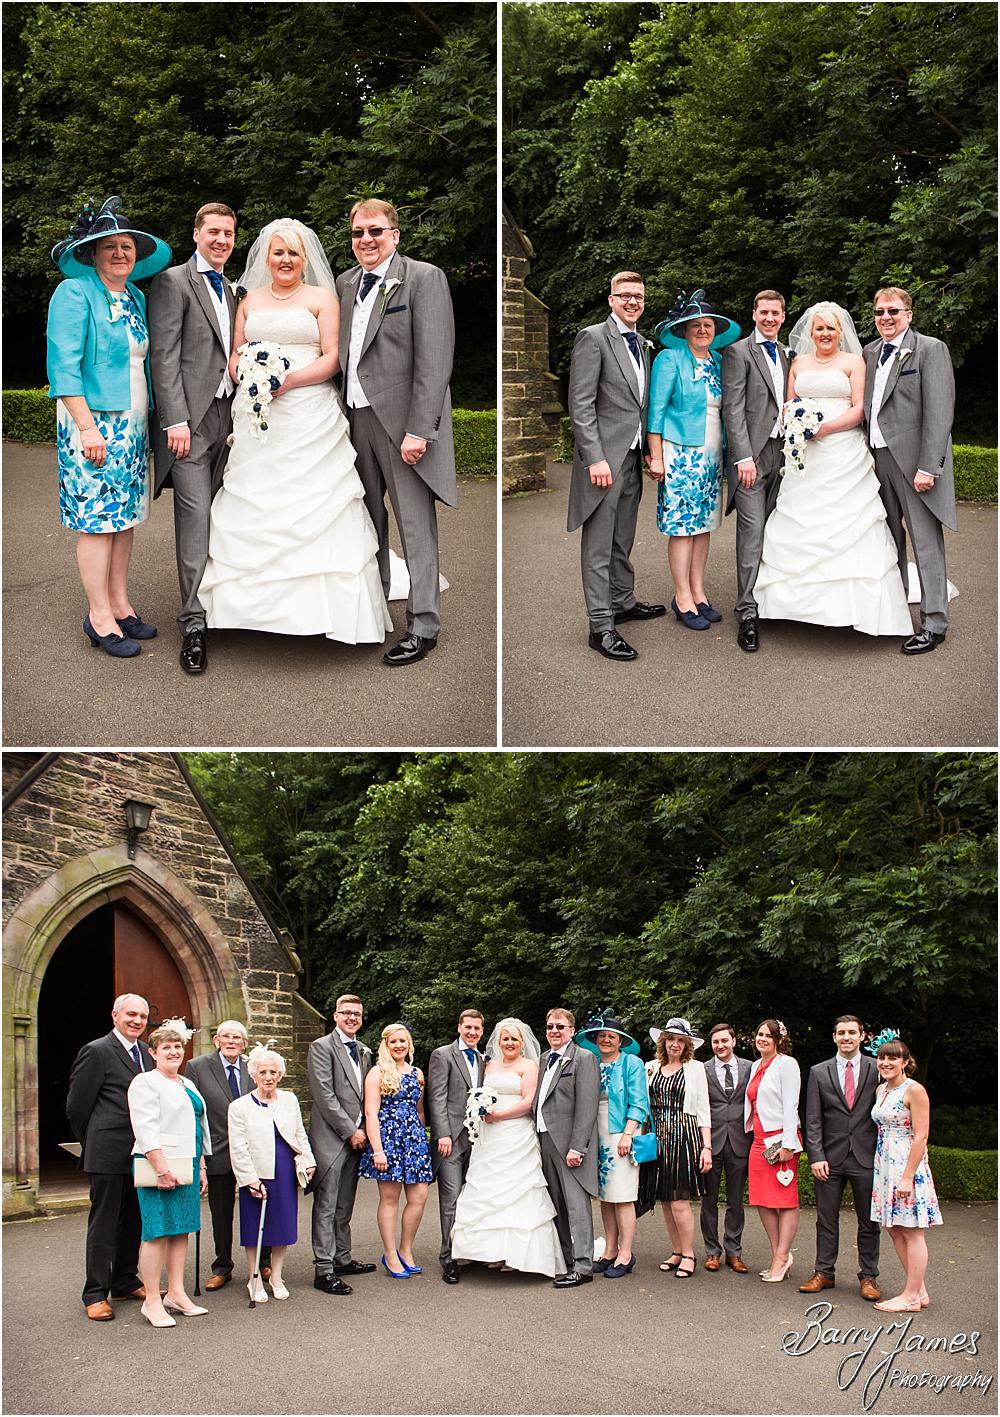 Relaxed family group photographs after the ceremony at St Marks in Great Wyrley by Penkridge Wedding Photographer Barry James